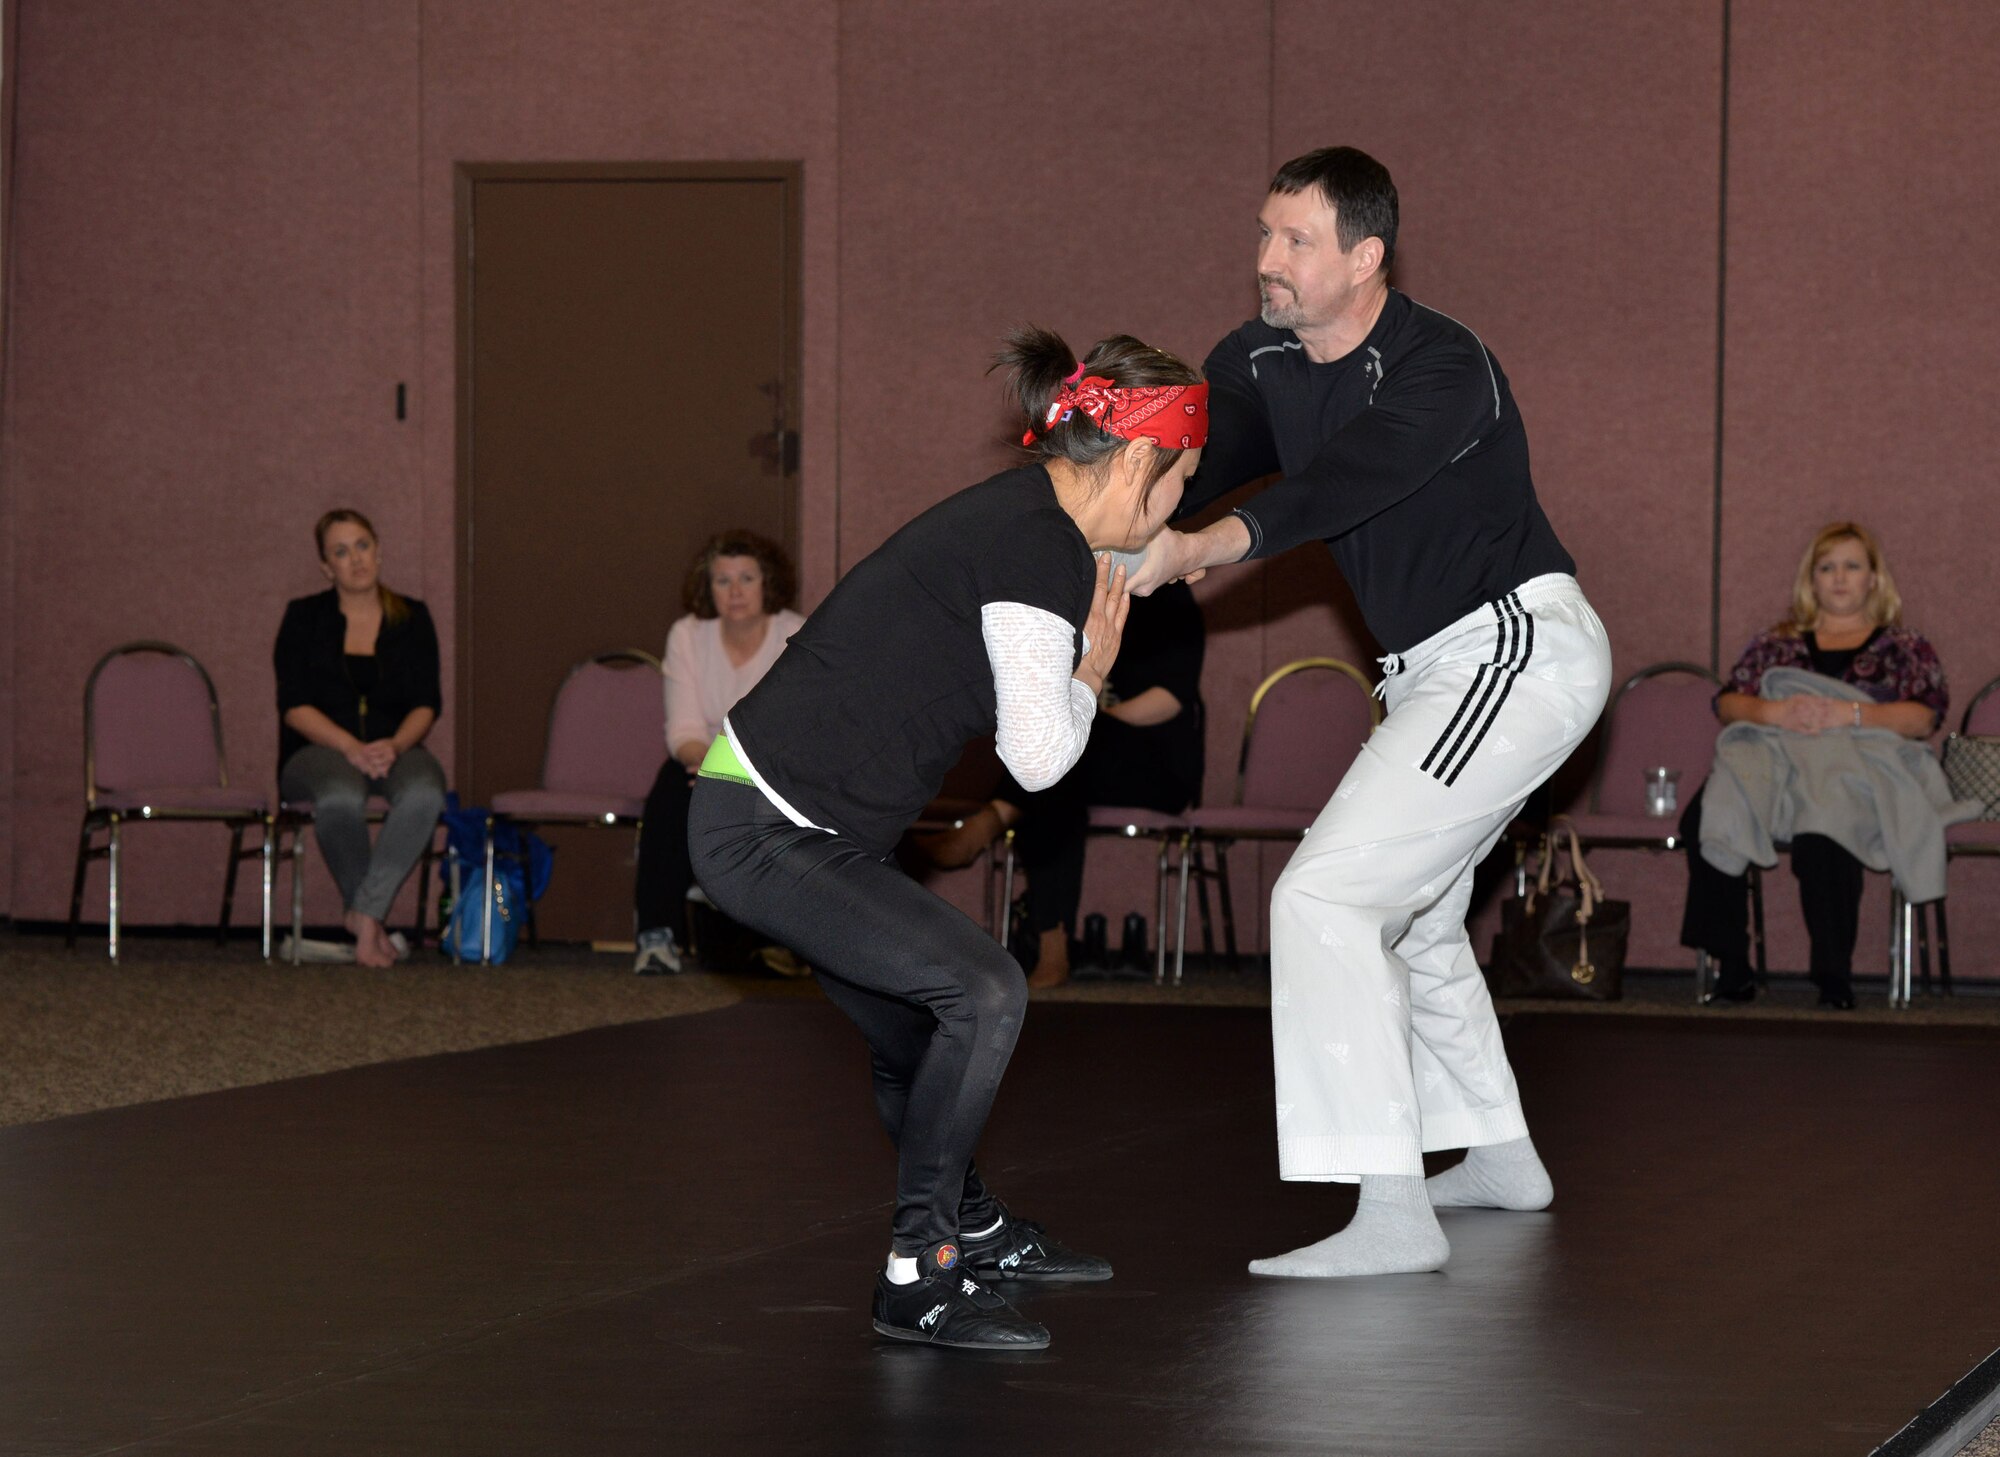 Randal Dannenfelser, engineer for Air Force Life Cycle Management Center and Camila Dannenfelser demonstrate self-defense strategies at the 11th annual Total Woman’s Training Expo hosted by Wright-Patterson Federal Woman’s Program and the Miami Valley Chapter of Federally Employed Women at the Hope Hotel and Conference Center March 25. The purpose of FWP and FEW organizations is the advancement and education of women in the federal workplace.  (U.S. Air Force photo by Michelle Gigante) 

